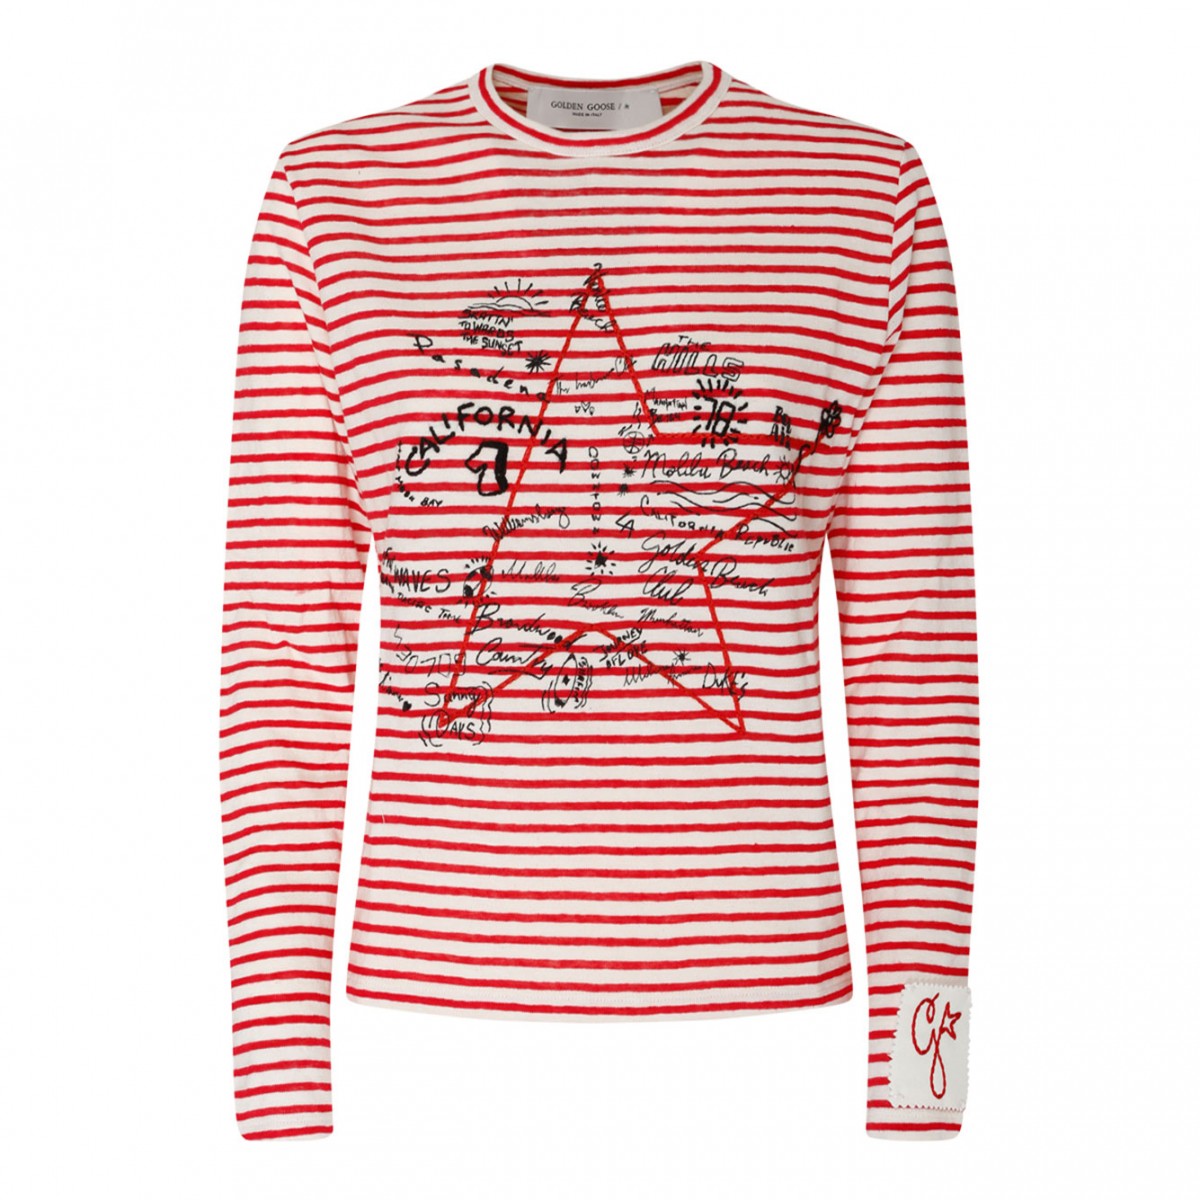 White and Red Striped T-Shirt